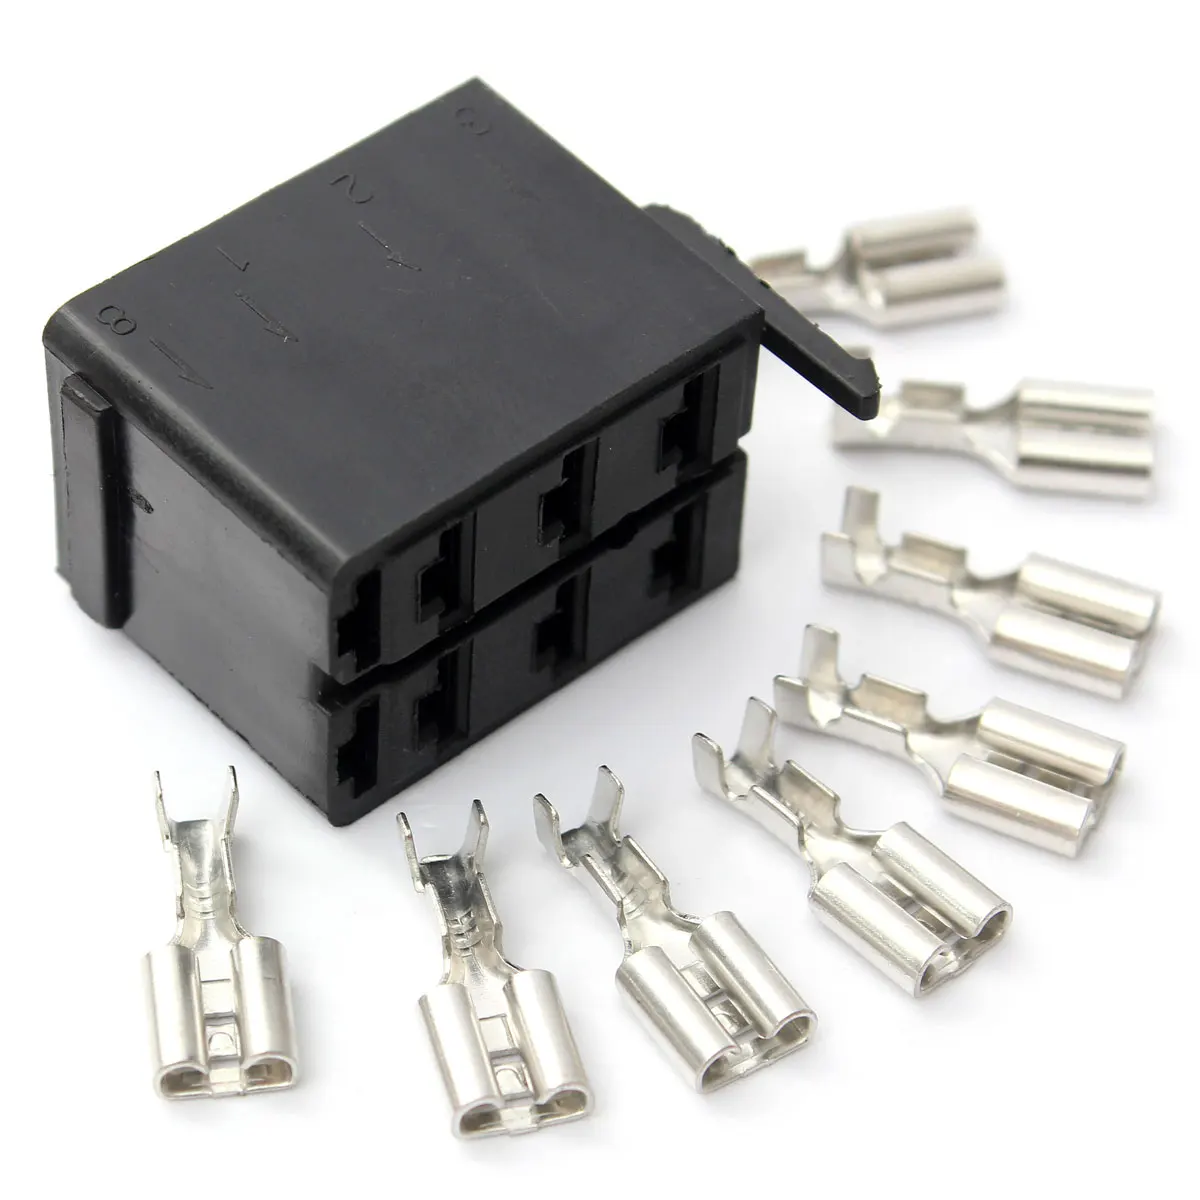 

8X Car Female Spade Terminals Connectors For ARB Socket Plugs For Carling Rocker Switch Arb Narva Type